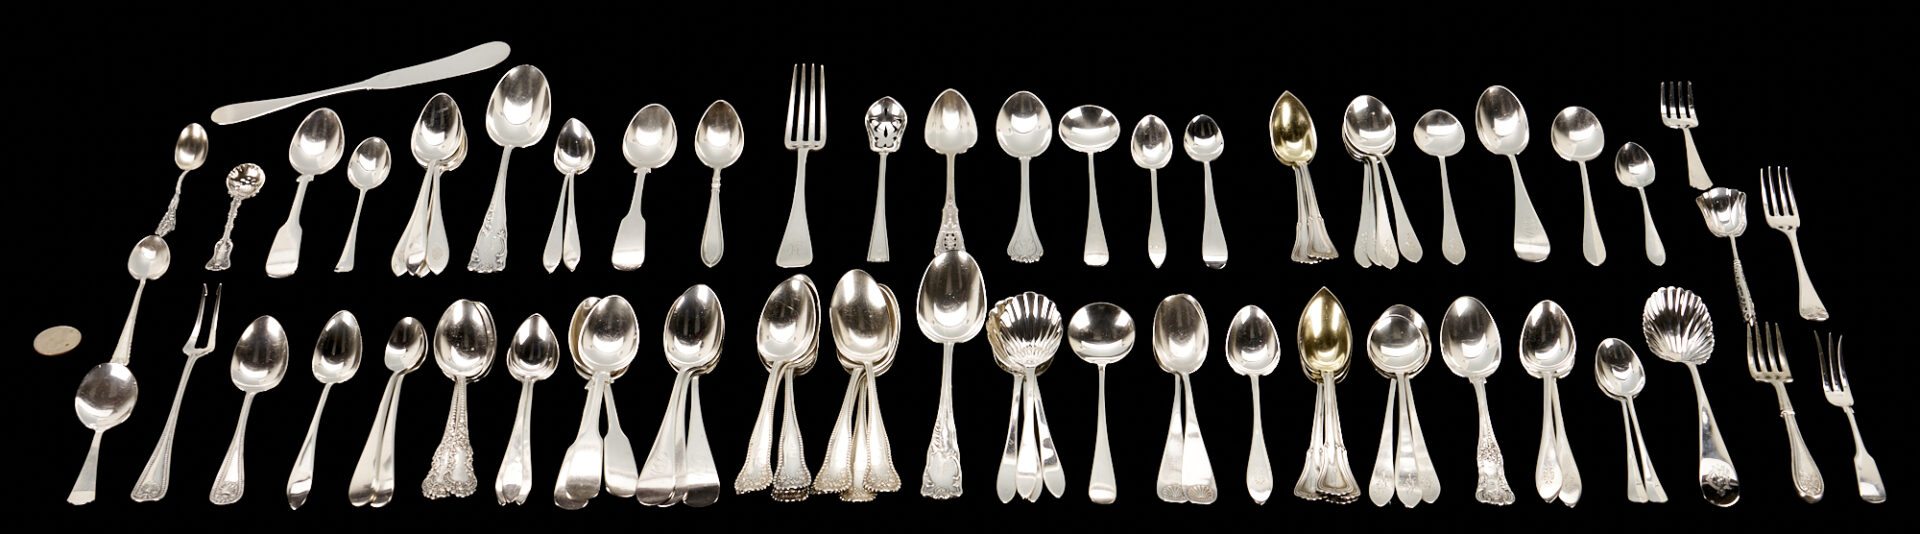 Lot 295: 87 Assorted Sterling Silver Flatware Items